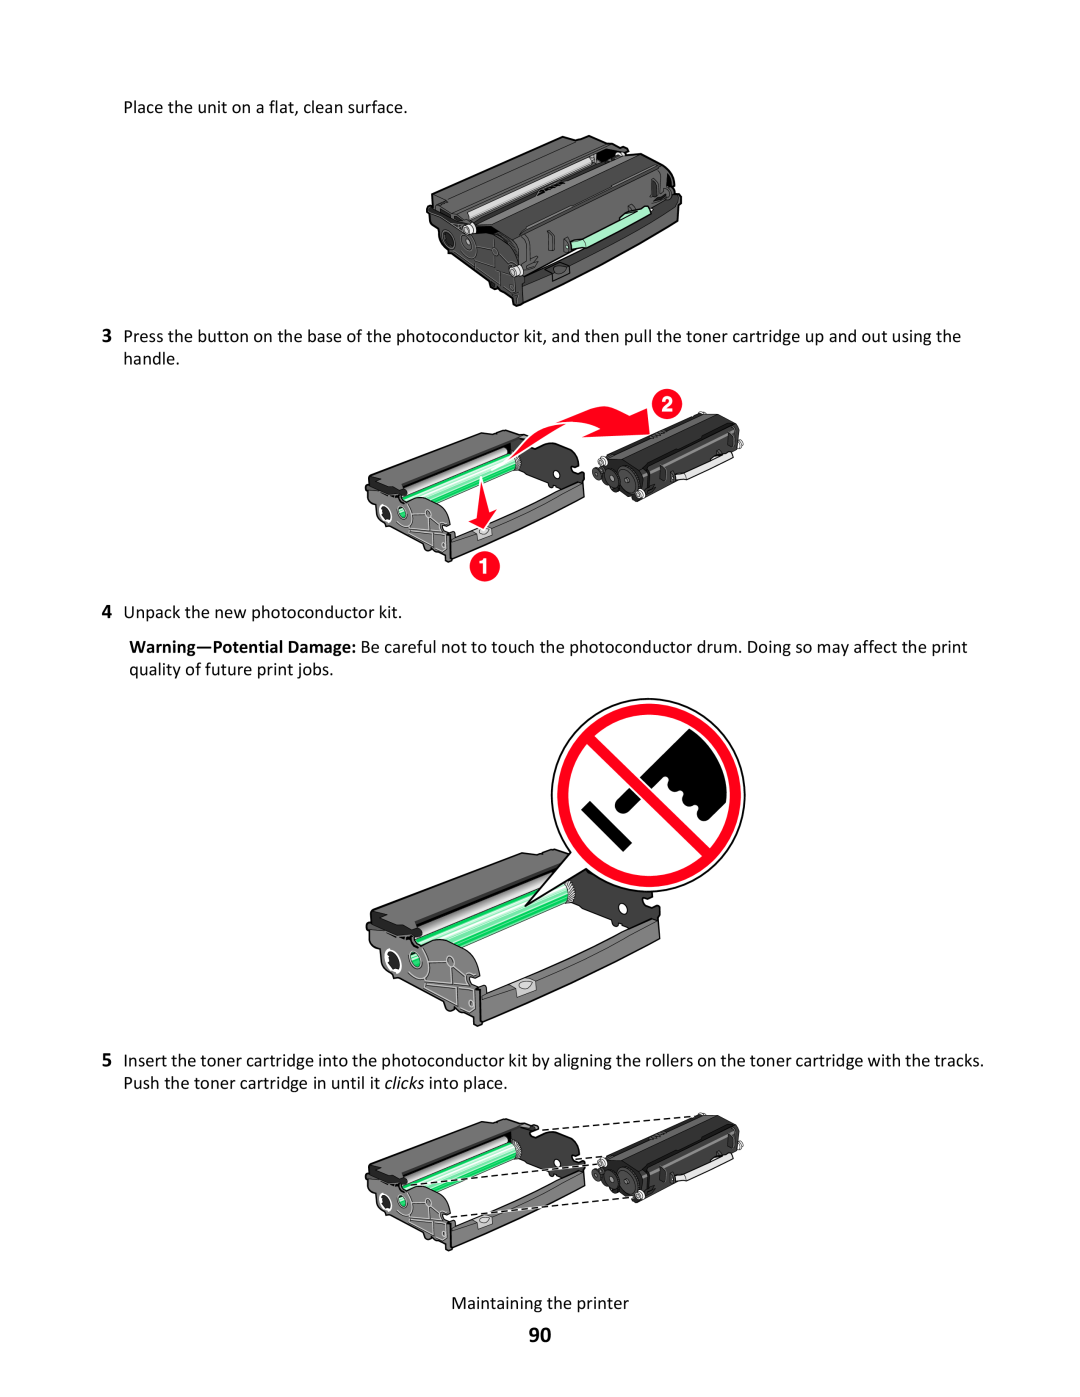 Lexmark 34S0300 manual Place the unit on a flat, clean surface, Unpack the new photoconductor kit, Maintaining the printer 